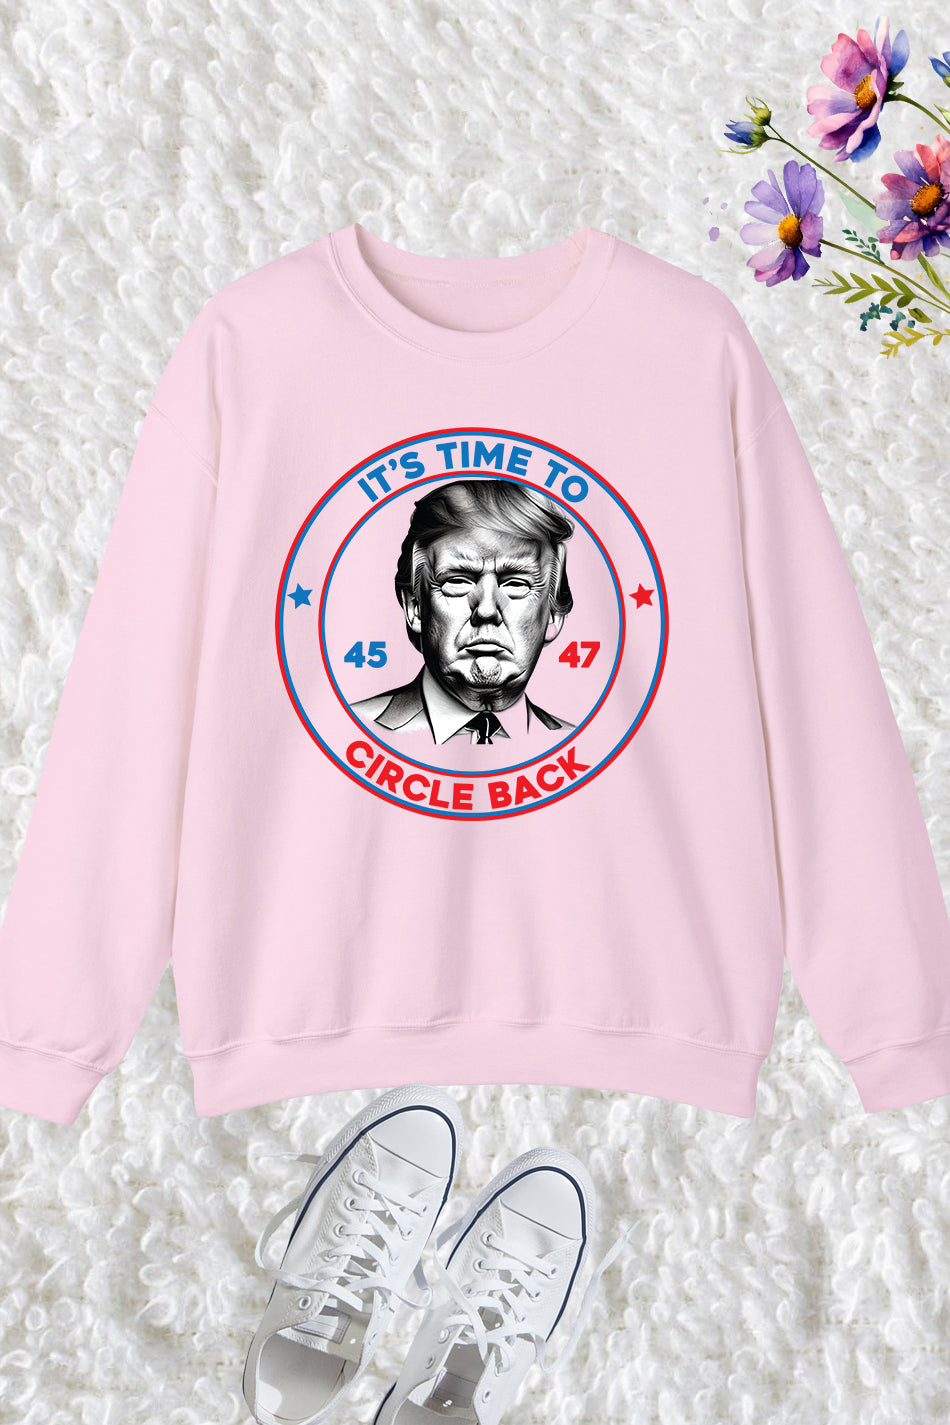 It's Time To Circle Back Trump Election Campaign Sweatshirt